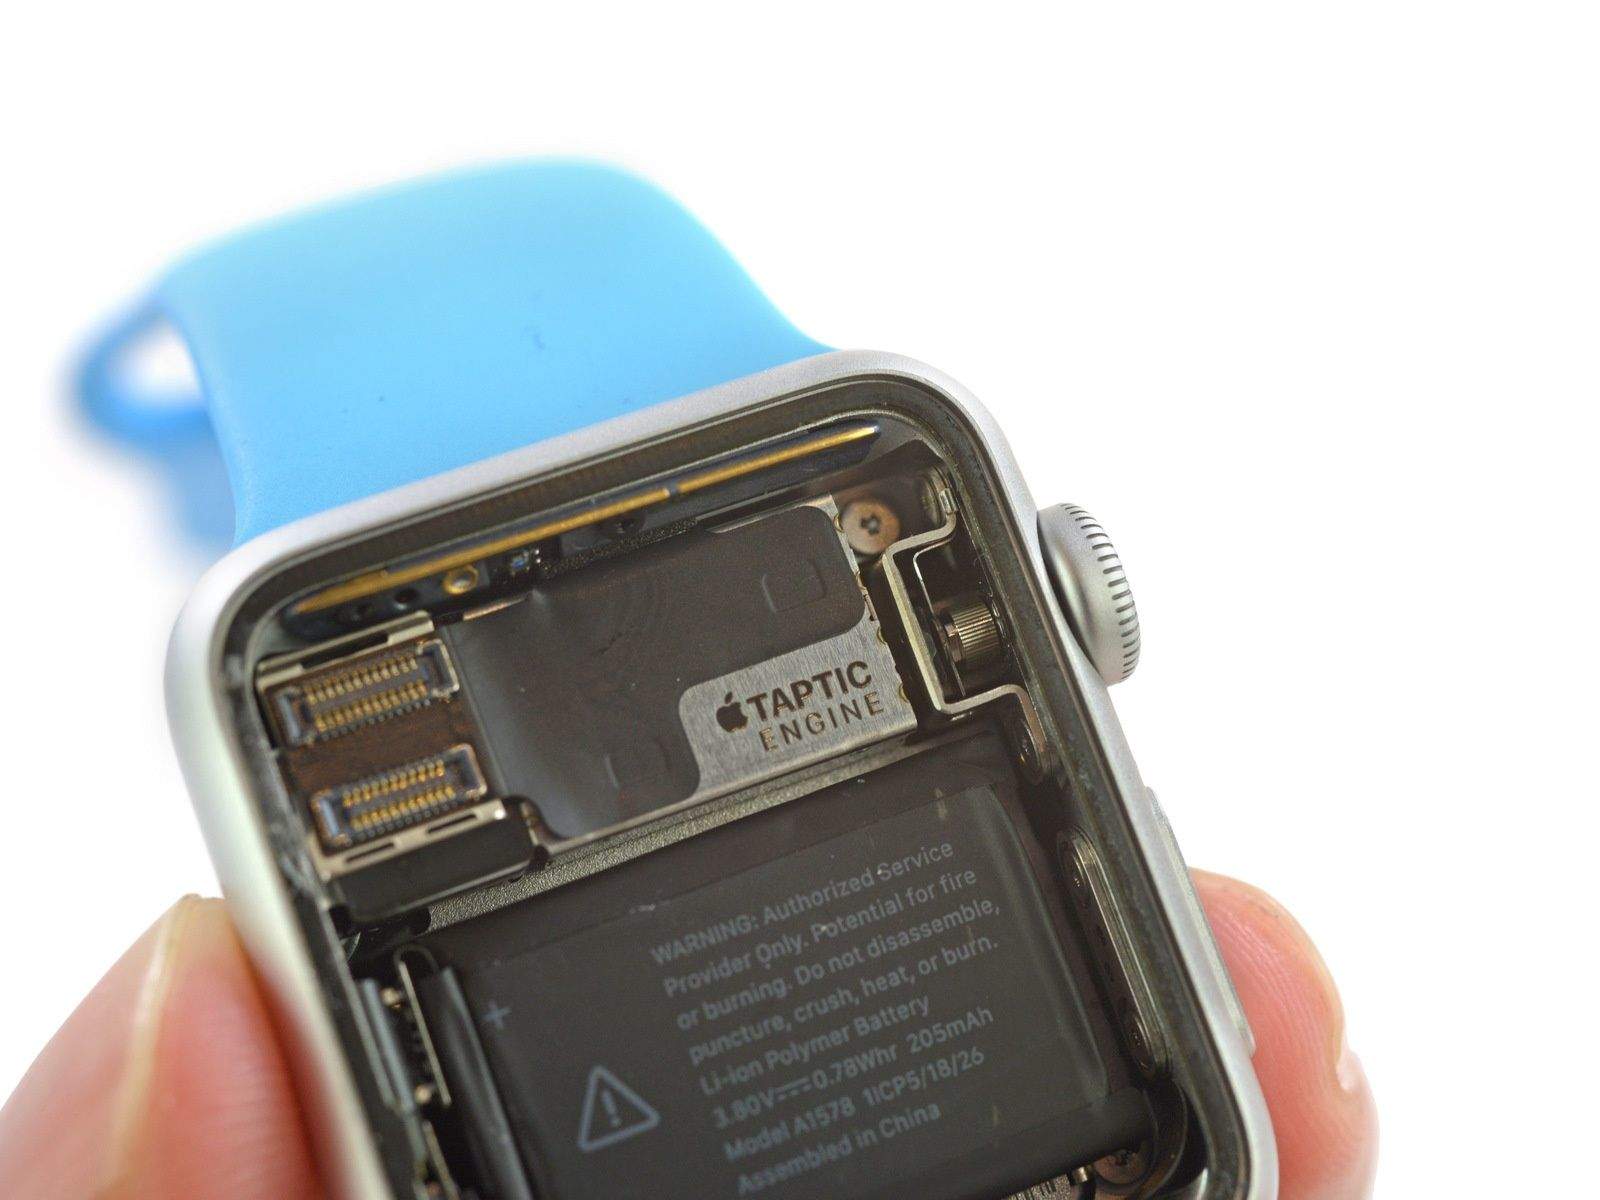 The guts of the Apple Watch are shockingly inexpensive. Photo: iFixit